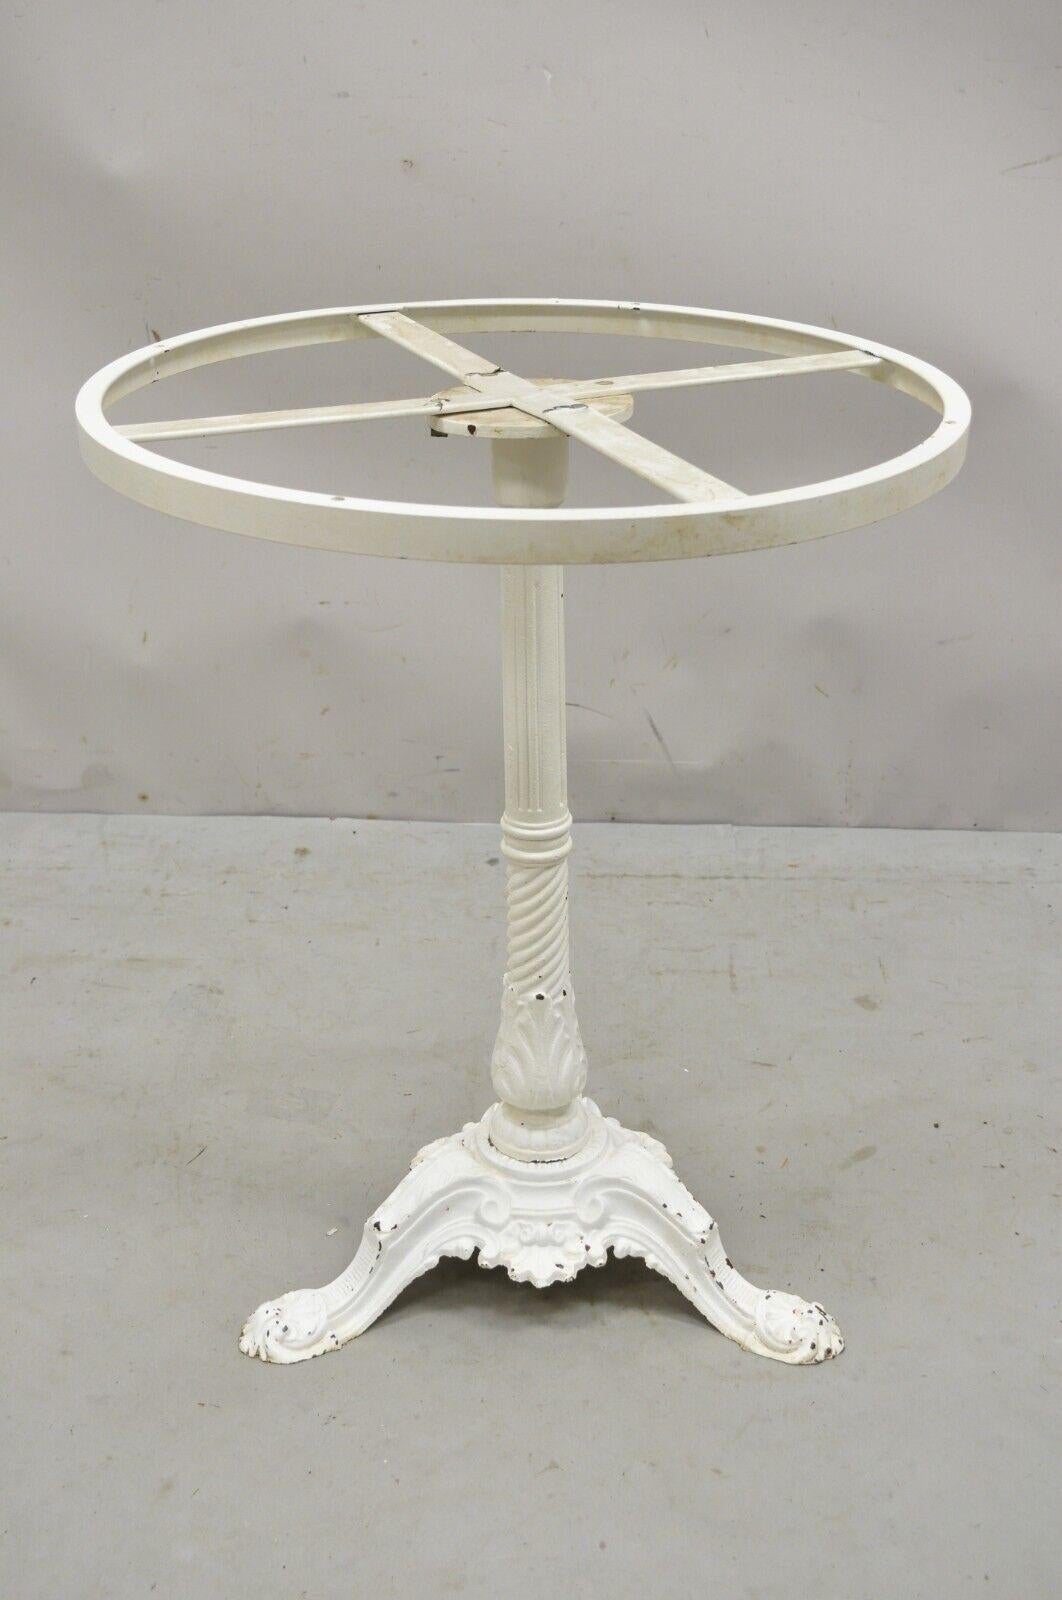 Pierre Ouvrier & E Ringuet Paris French cast iron bistro pedestal table base. Item features a heavy cast iron base, original French makers stamp, very nice antique item, quality French craftsmanship, great style and form. Circa early